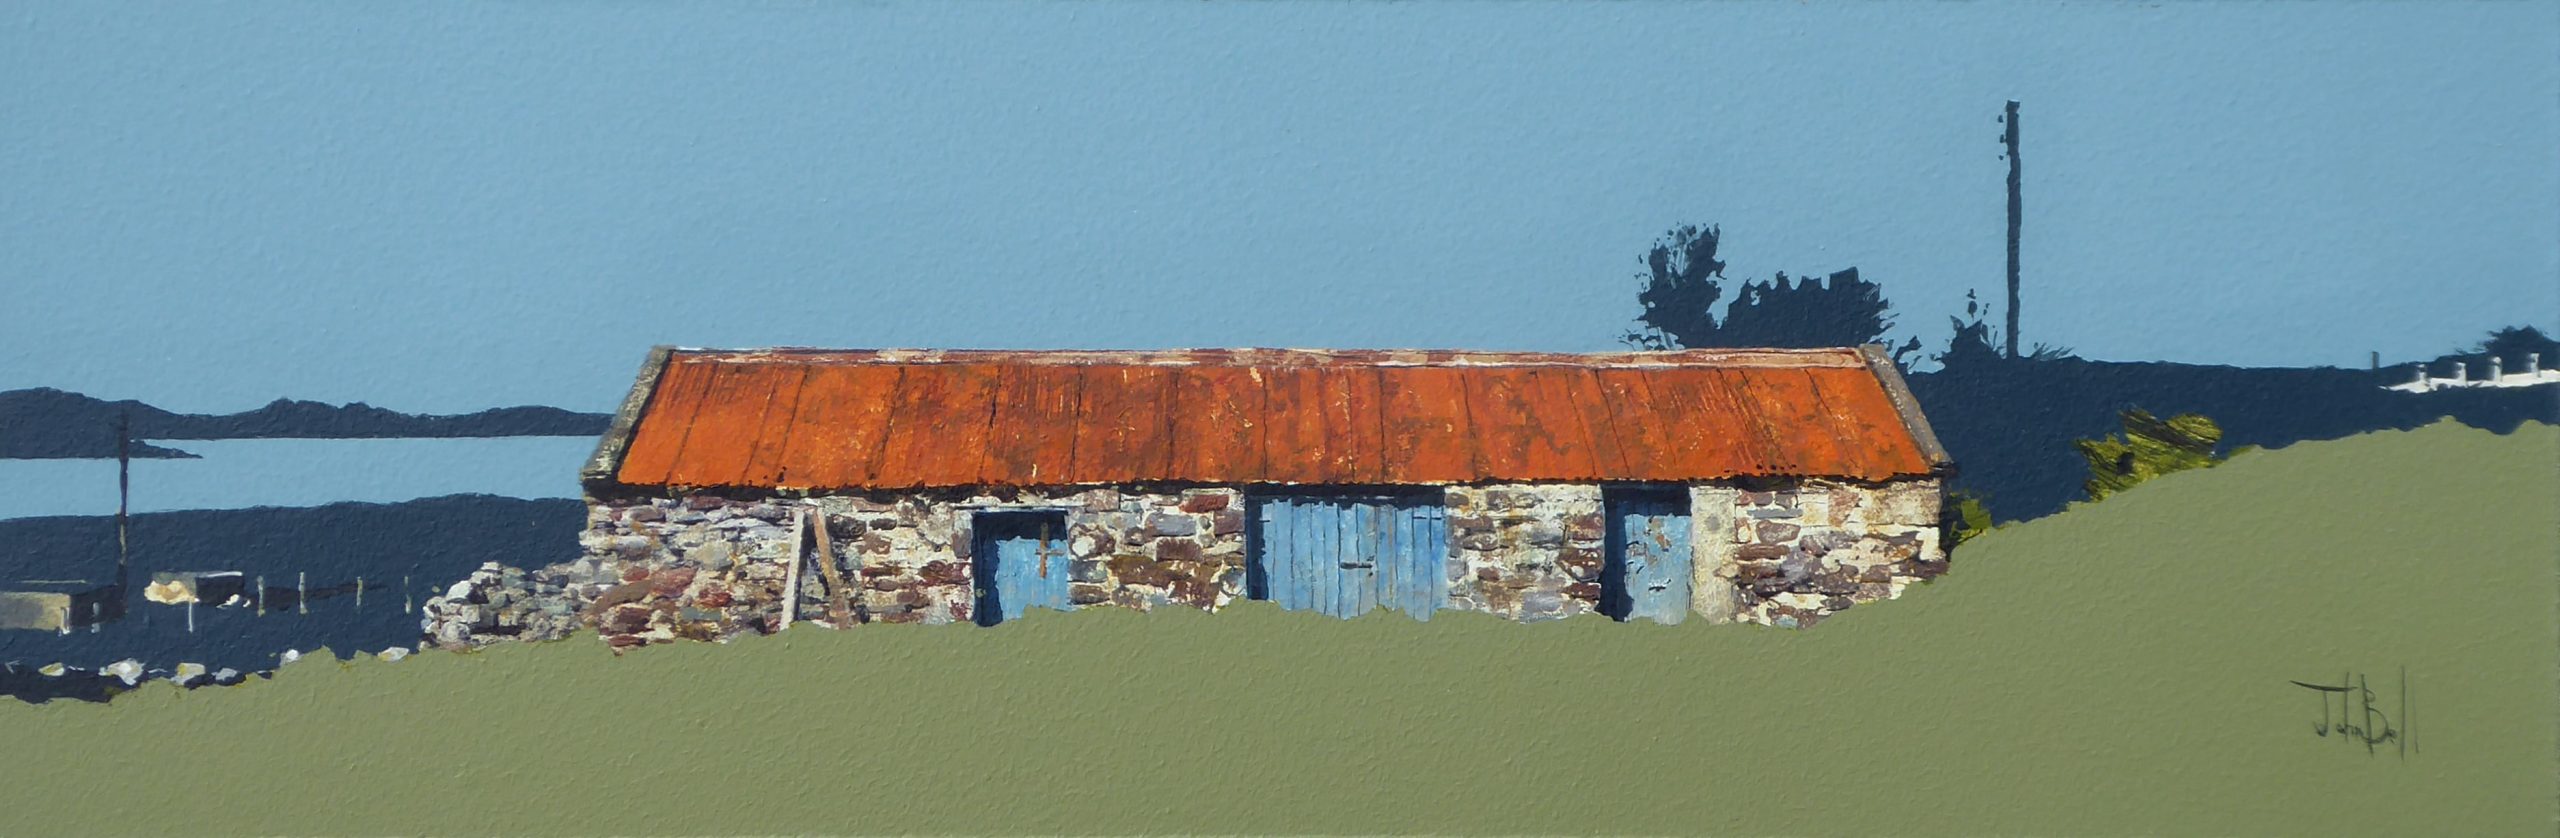 Aultbea Barn and Loch Ewe (18 x 6 inches)-min